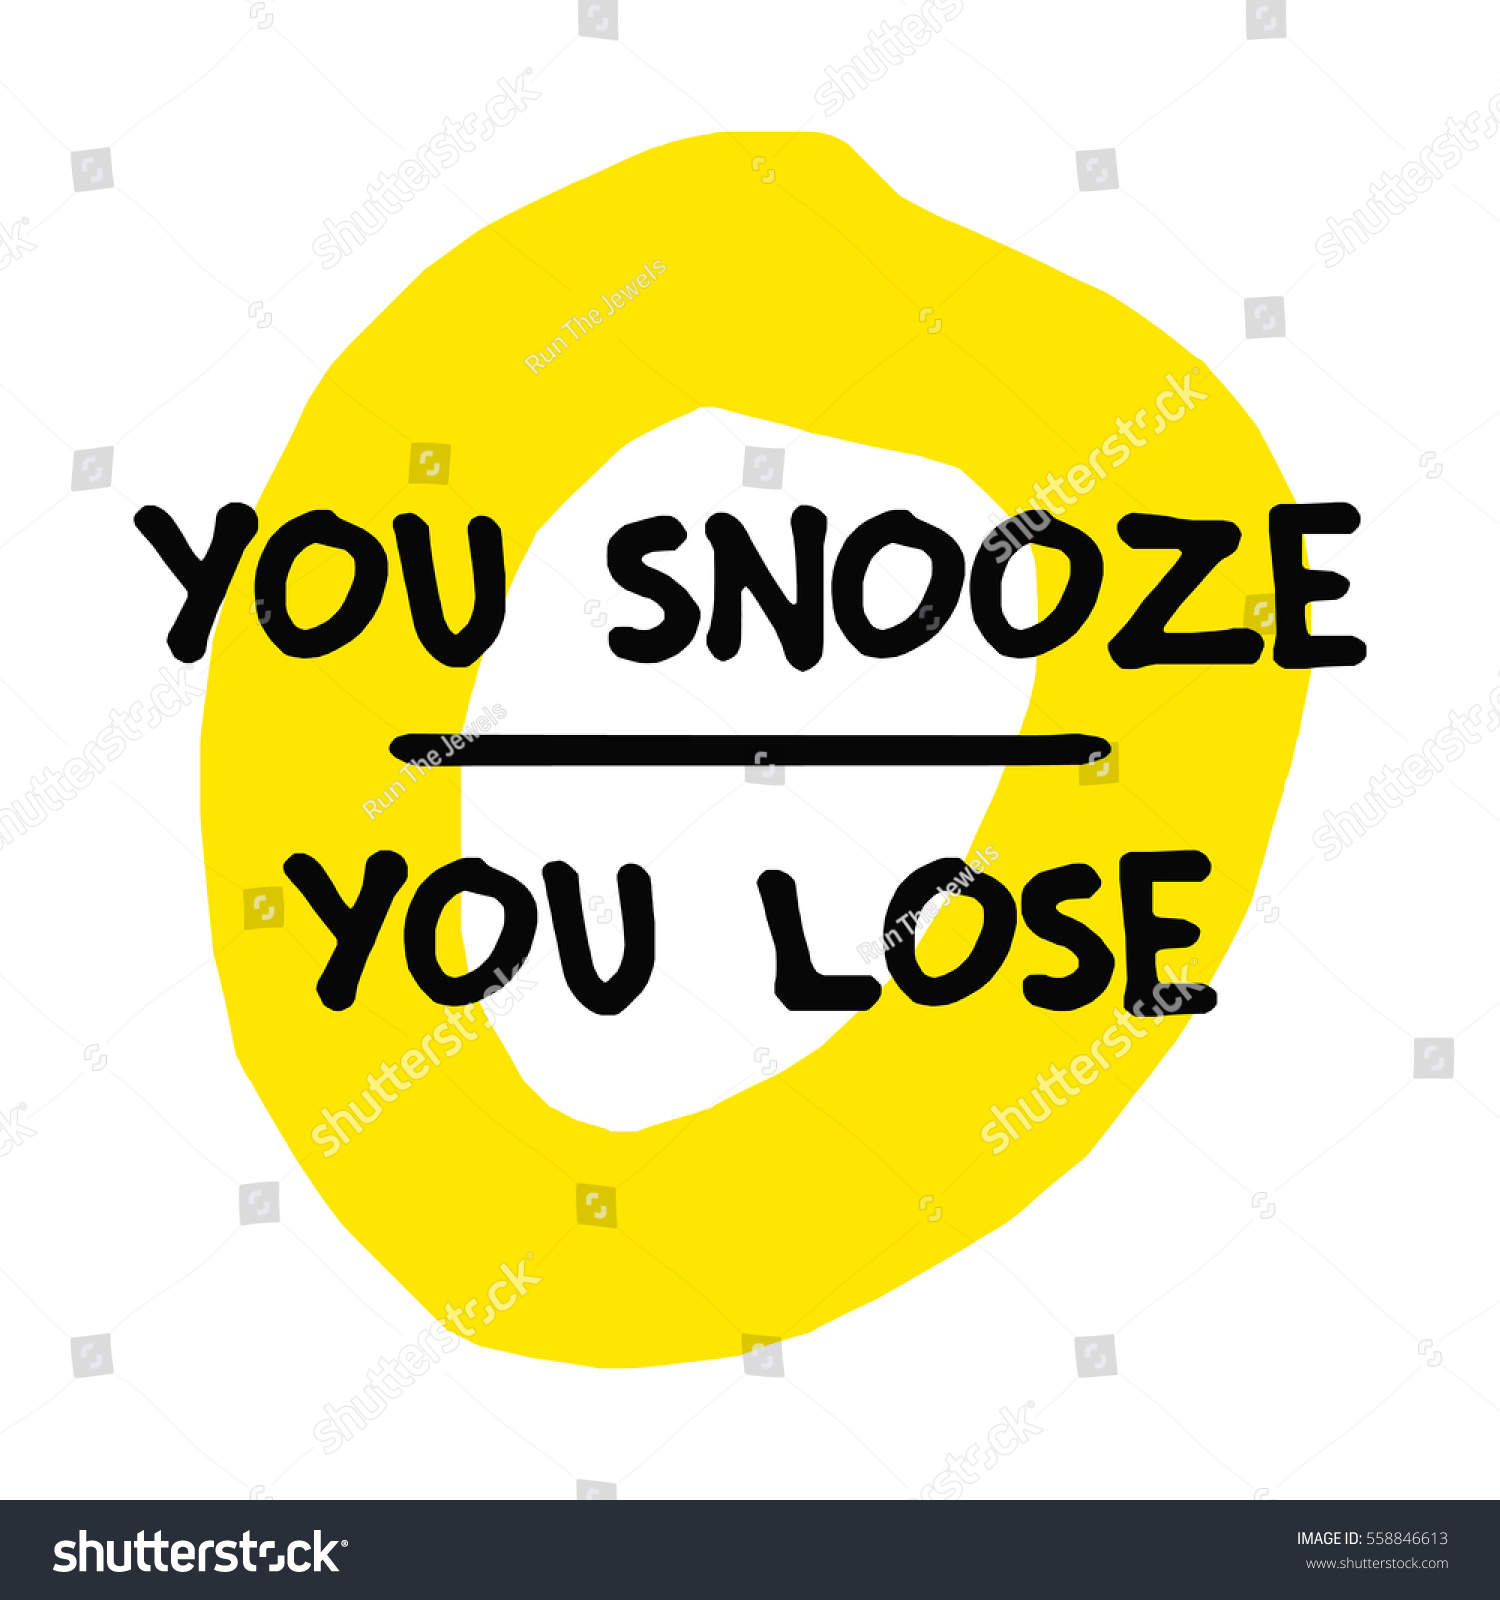 You snooze you lose gif